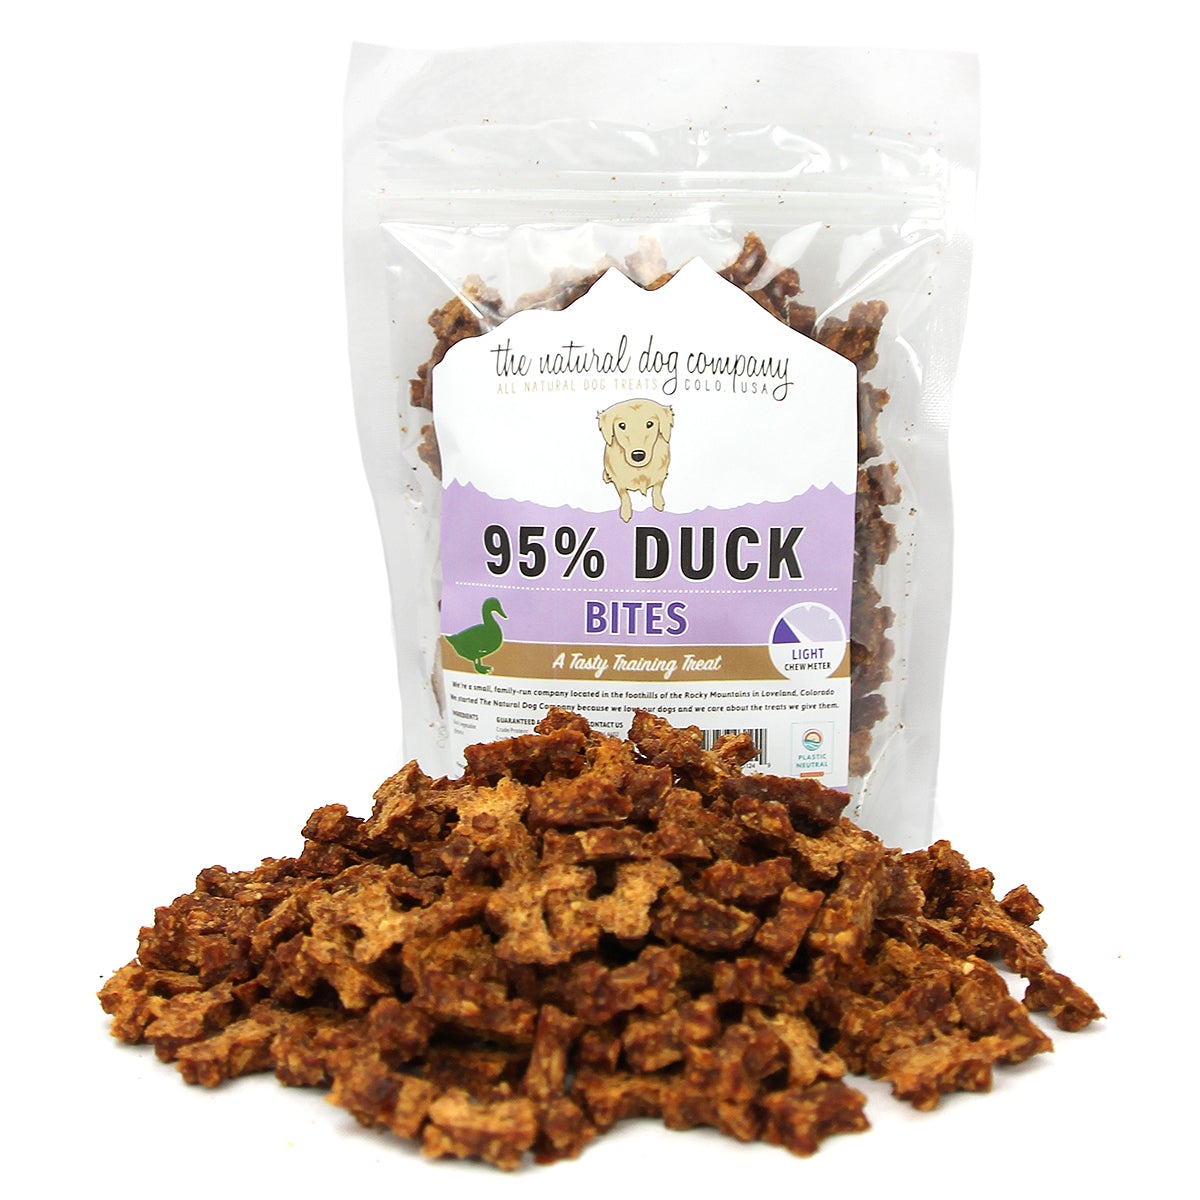 Tuesday's Natural Dog Company Duck Bites